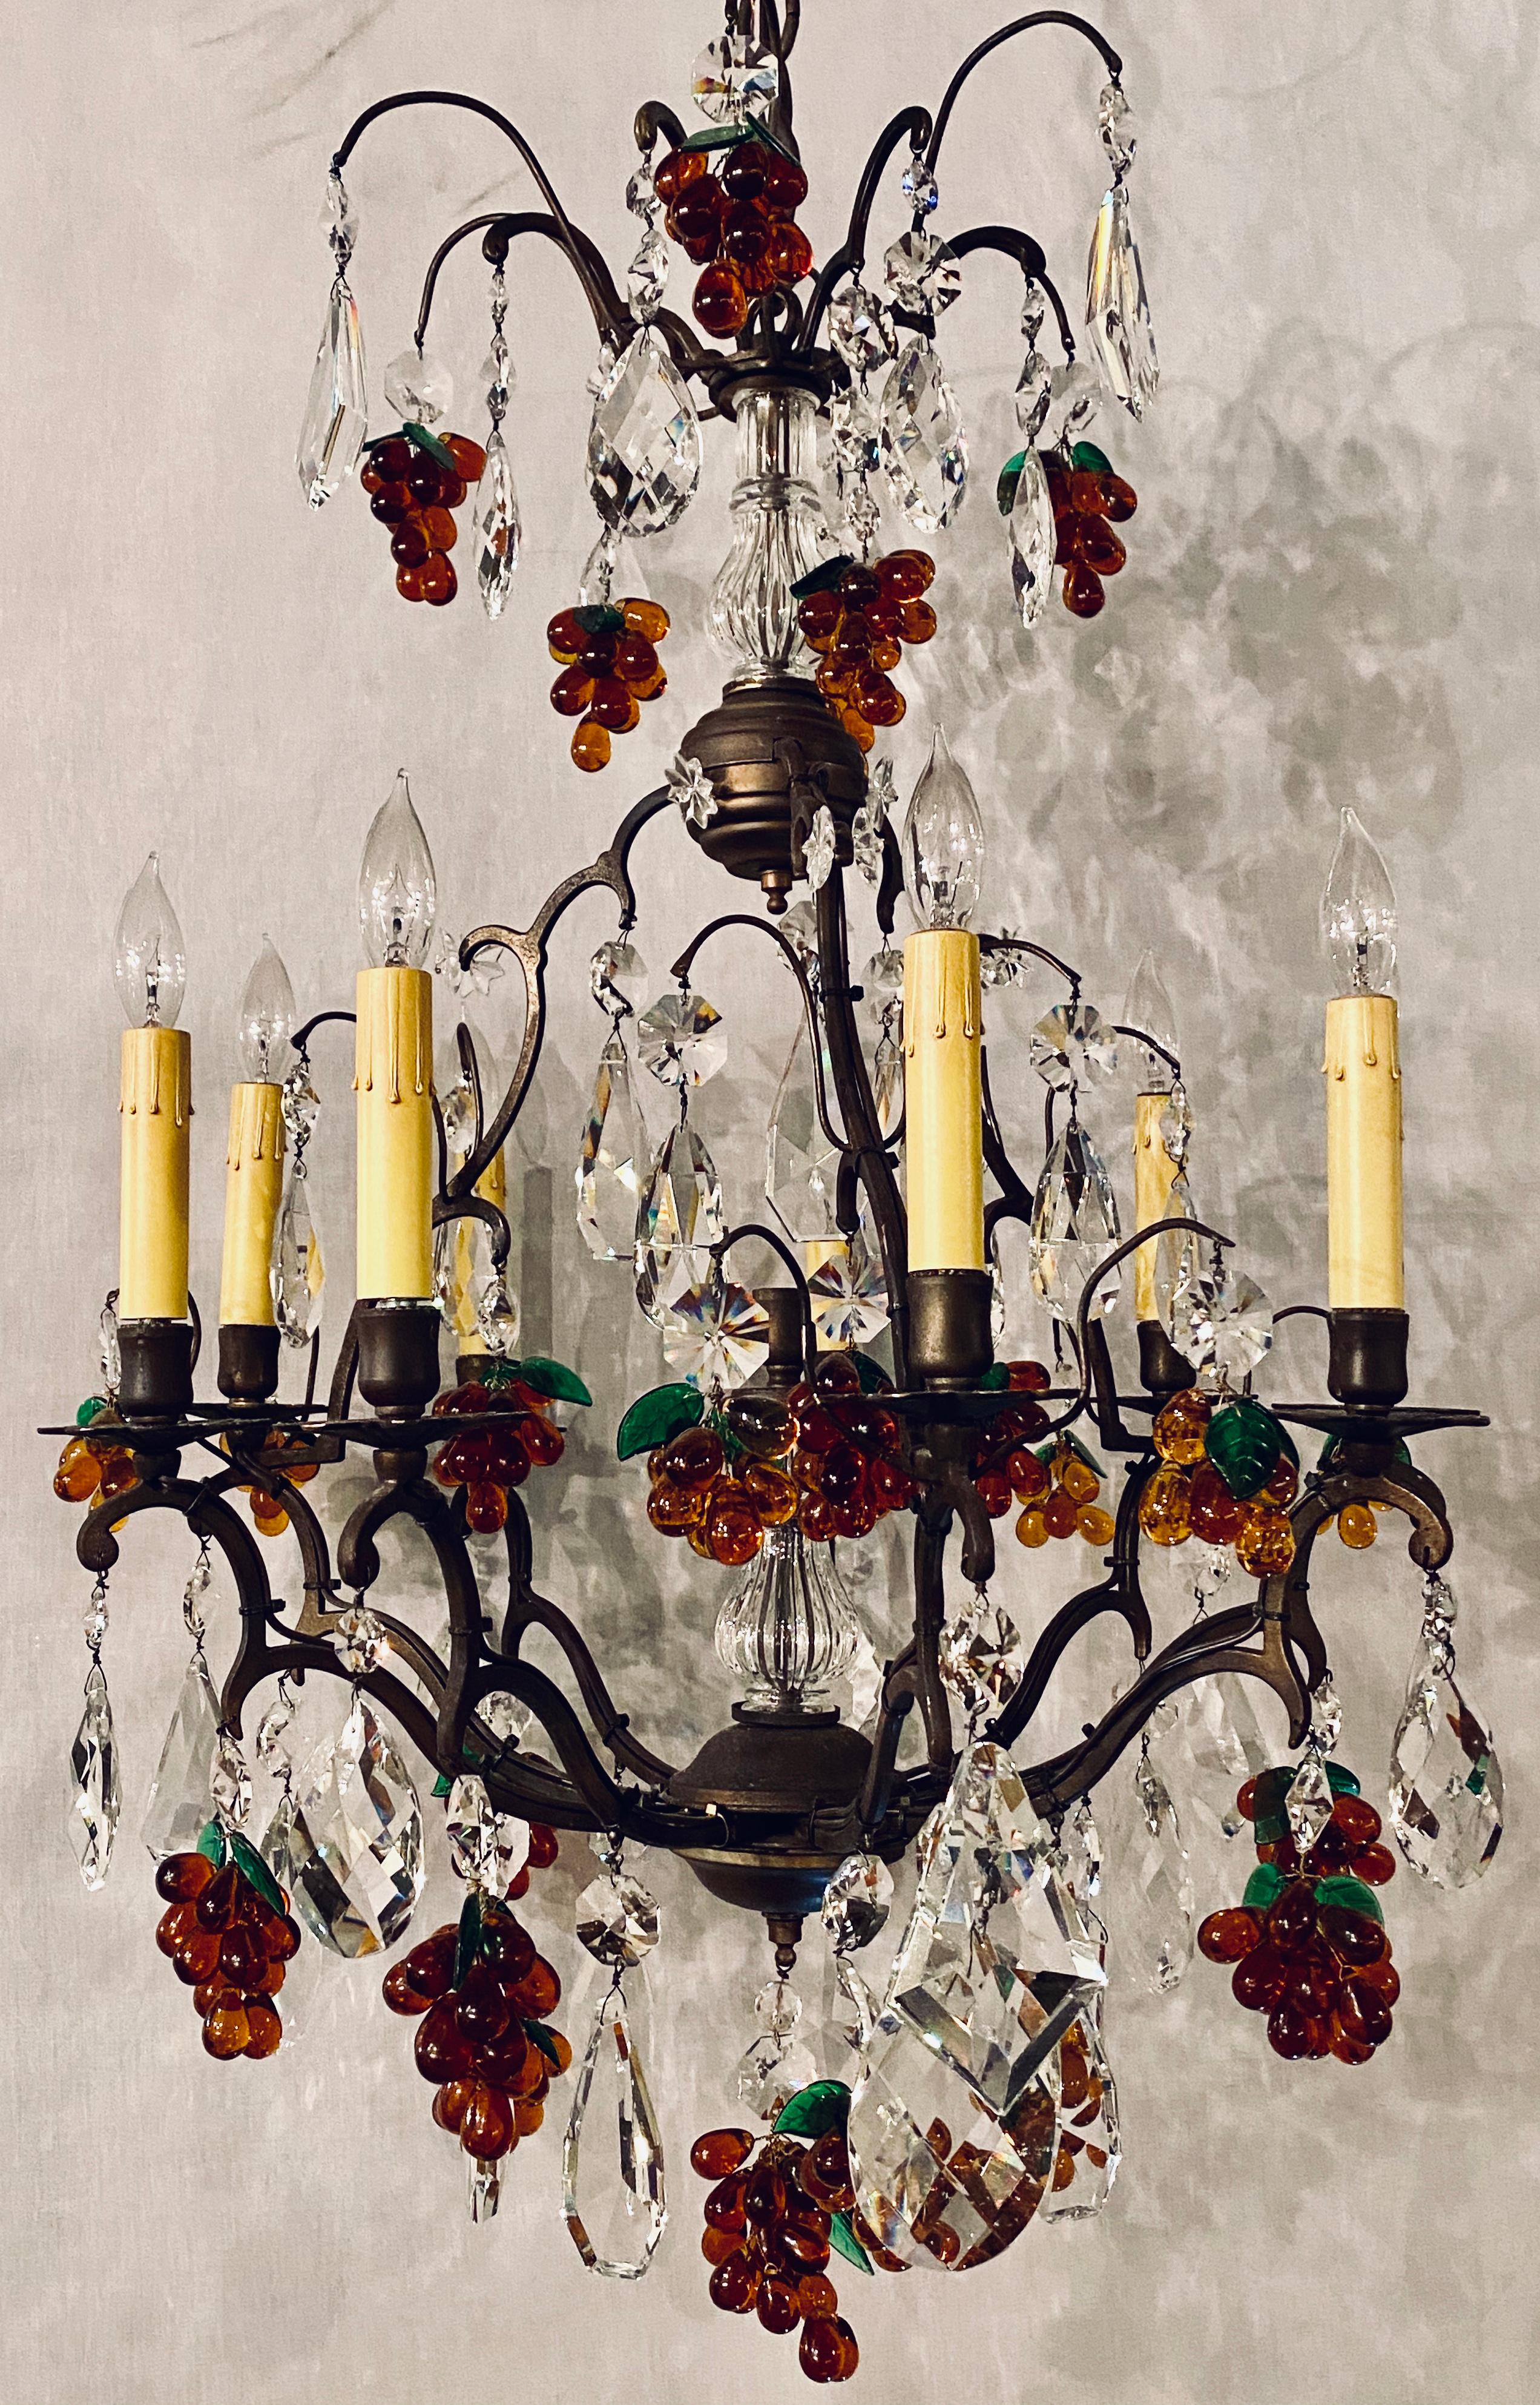 French bronze patina 9-light chandelier cut crystal & glass fruit decorations. This is simply a fine and fun chandelier. The whole in a bronze patinated frame having nine lighted arms and full cut class crystals along with many glass fruit